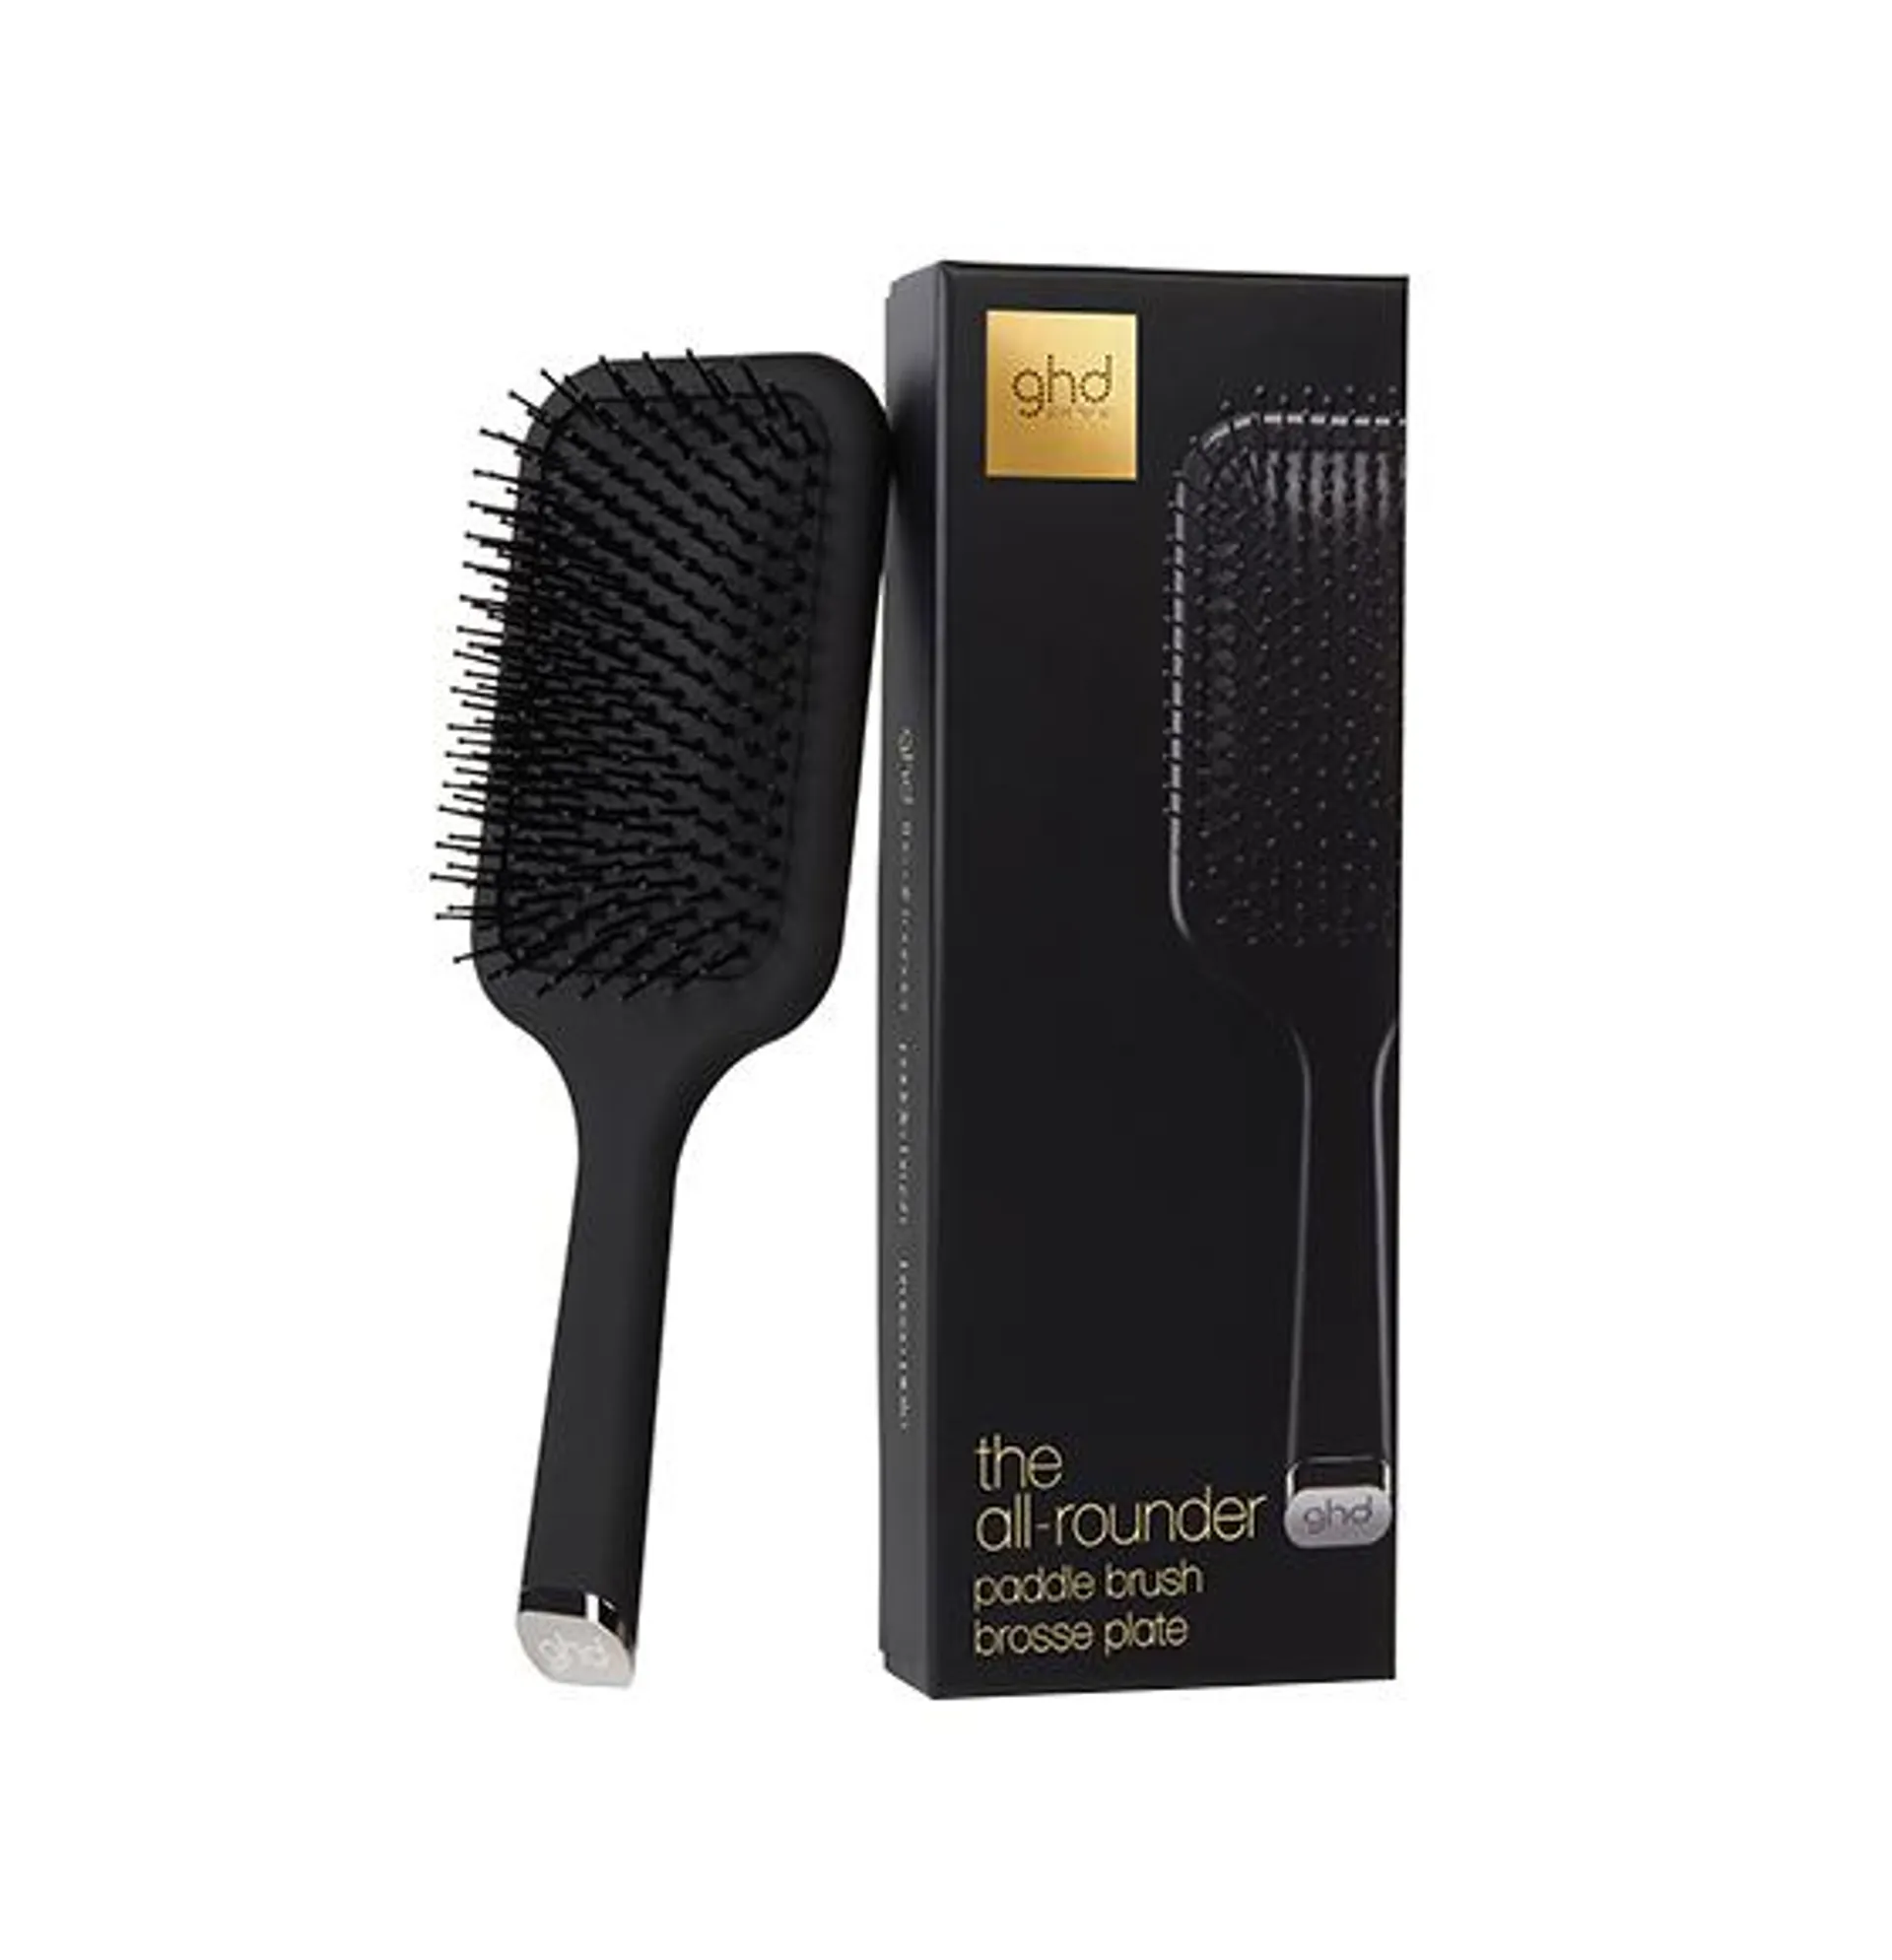 ghd The All-Rounder Brush